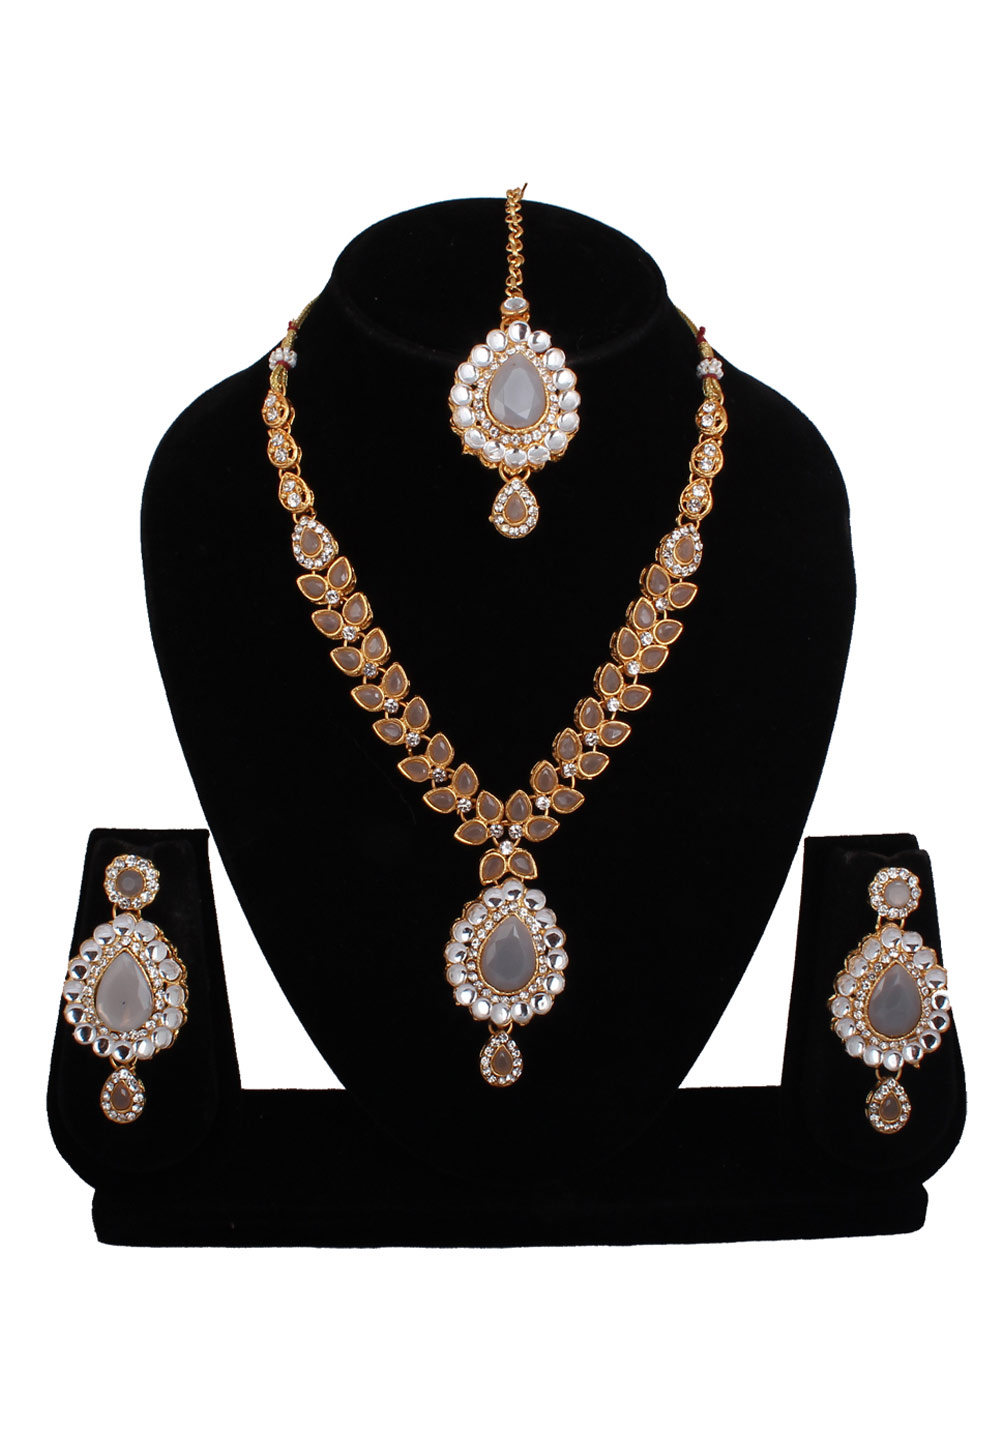 Off White Alloy Necklace Set With Earrings and Maang Tikka 257305